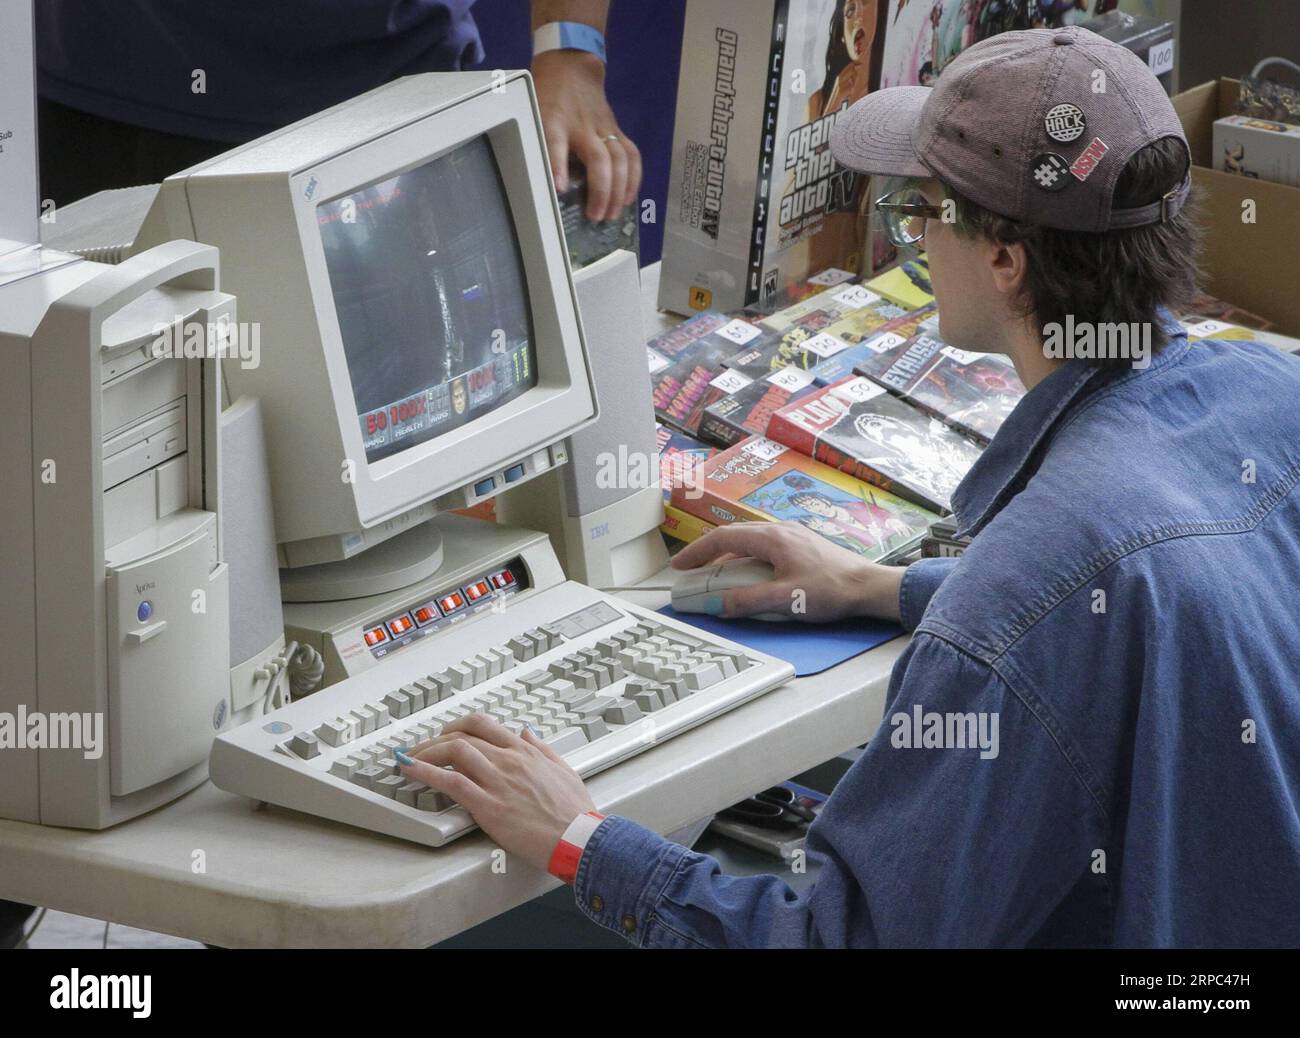 (190622) -- VANCOUVER, June 22, 2019 -- A visitor tries a computer game at the Vancouver Retro Gaming Expo in New Westminster, Canada, June 22, 2019. The Vancouver Retro Gaming Expo was held at the Anvil Centre on Saturday, offering different collections of video games, consoles and collectibles from 1970s to 1990s. ) CANADA-NEW WESTMINSTER-RETRO GAMING EXPO LiangxSen PUBLICATIONxNOTxINxCHN Stock Photo